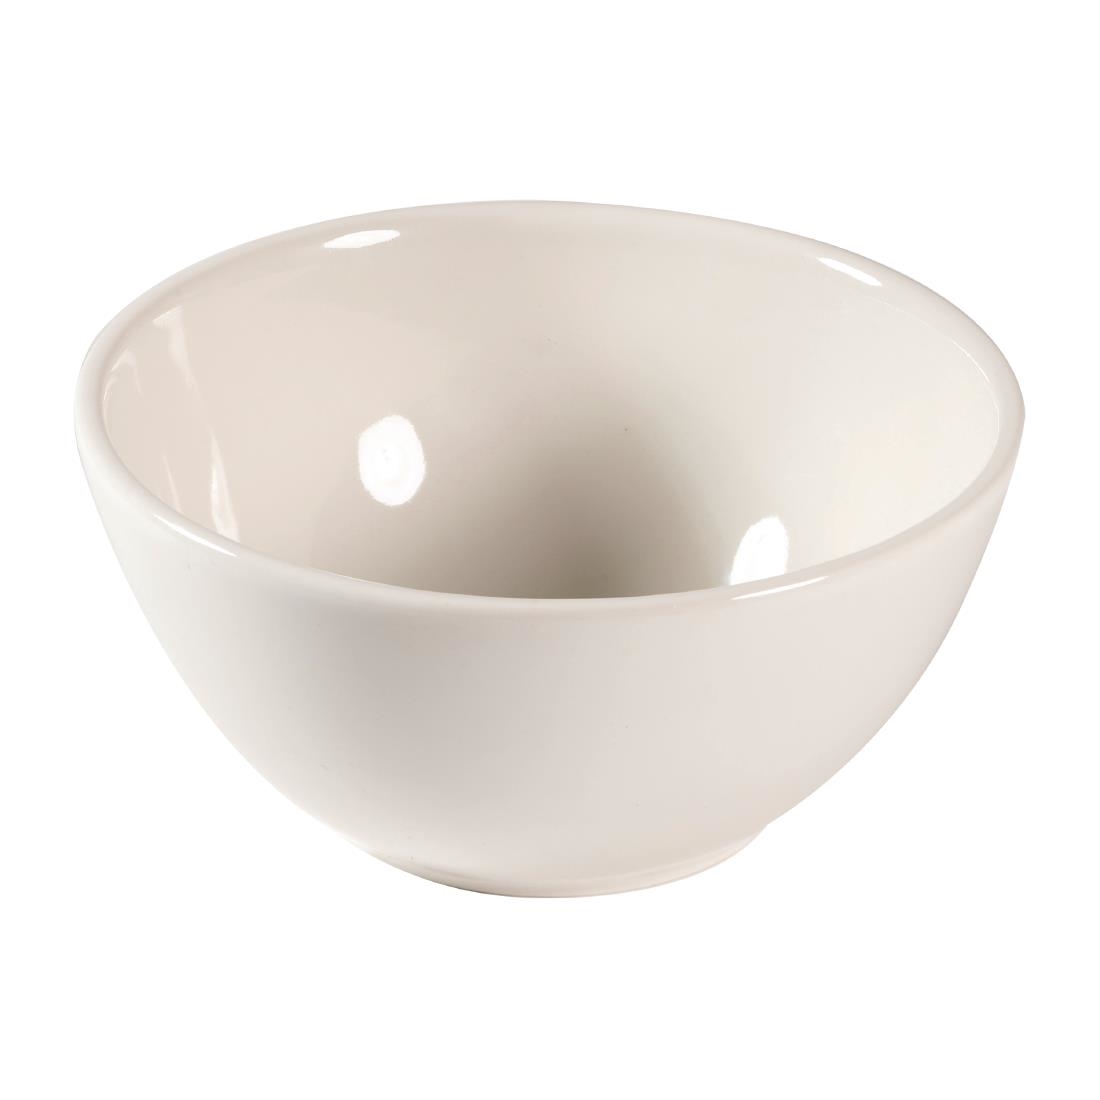 Churchill Profile Snack Bowls White 14oz 130mm (Pack of 12)